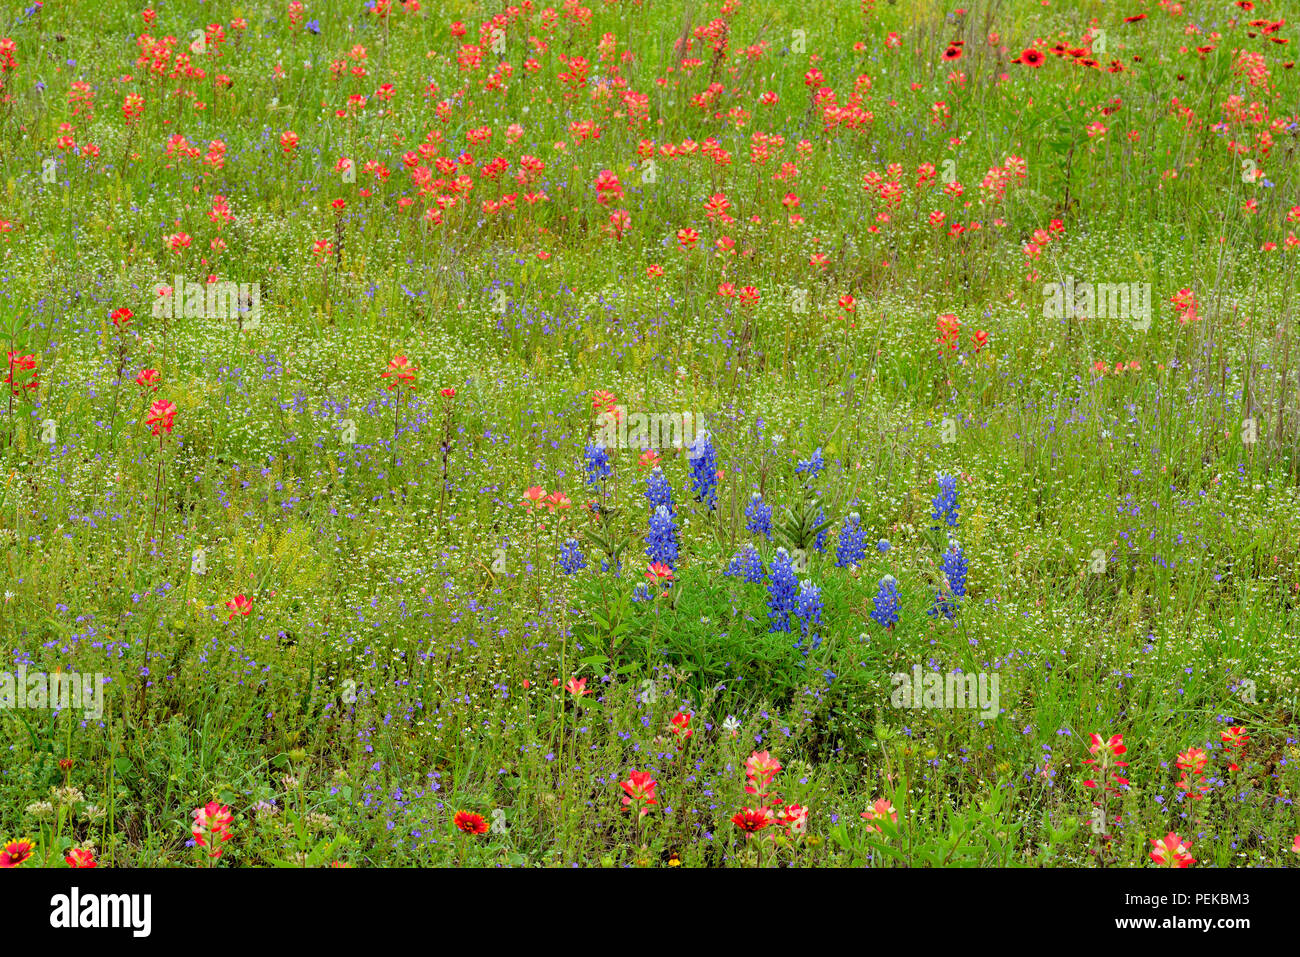 Roadside wildflowers in bloom featuring Texas paintbrush (Castilleja indivisa) and Texas bluebonnet (Lupinus subcarnosus), Llano County, Texas, USA Stock Photo